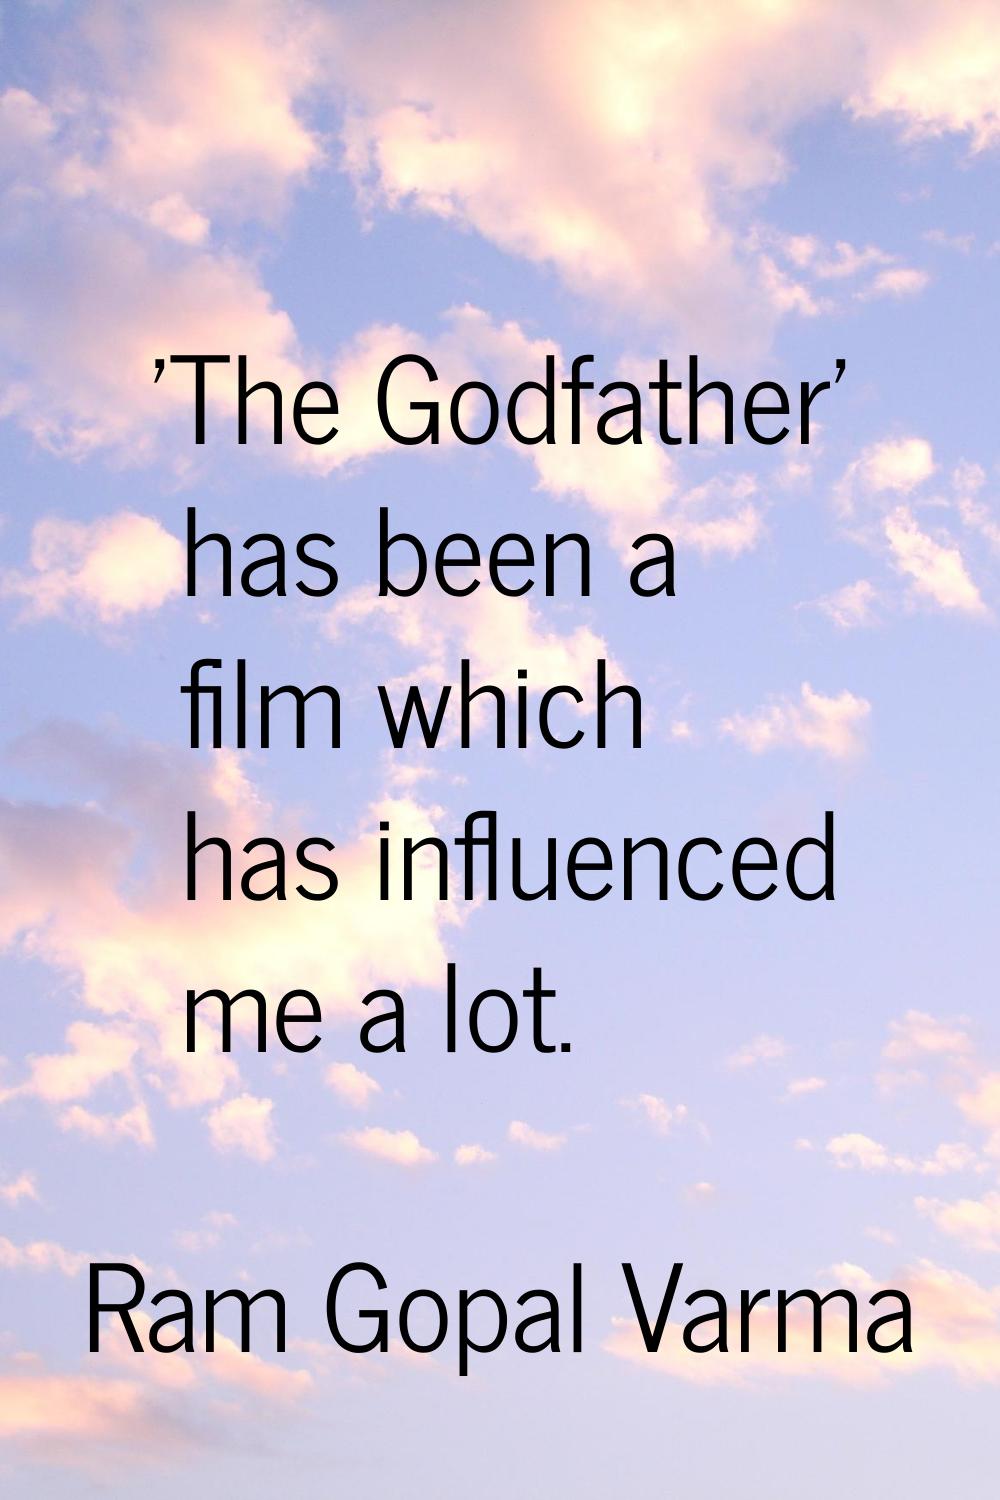 'The Godfather' has been a film which has influenced me a lot.